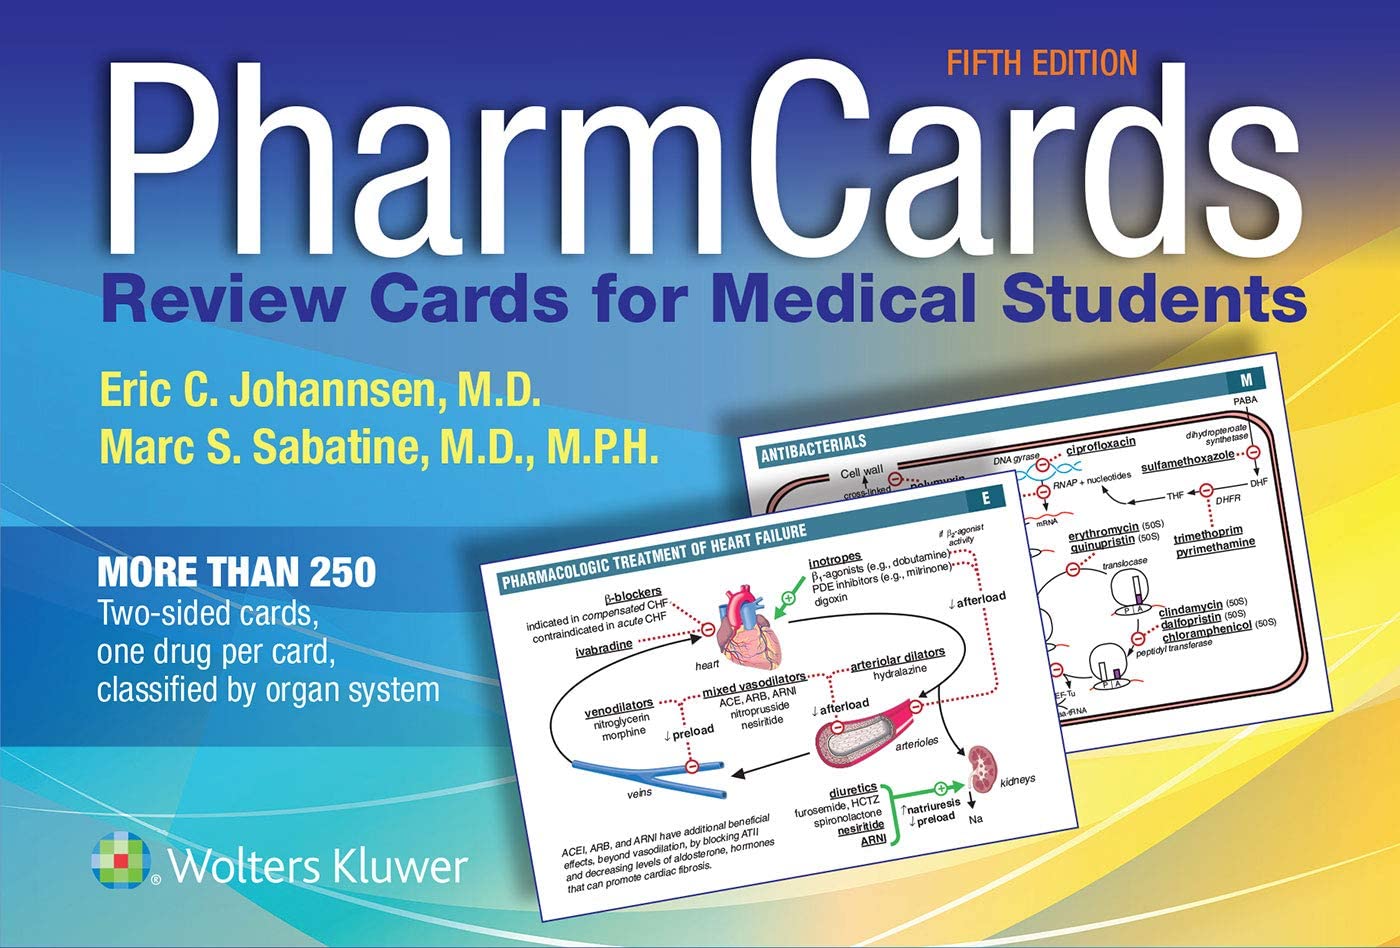 https://pickpdfs.com/review-cards-for-medical-students-fifth-edition-pdf-download-pickpdfs/